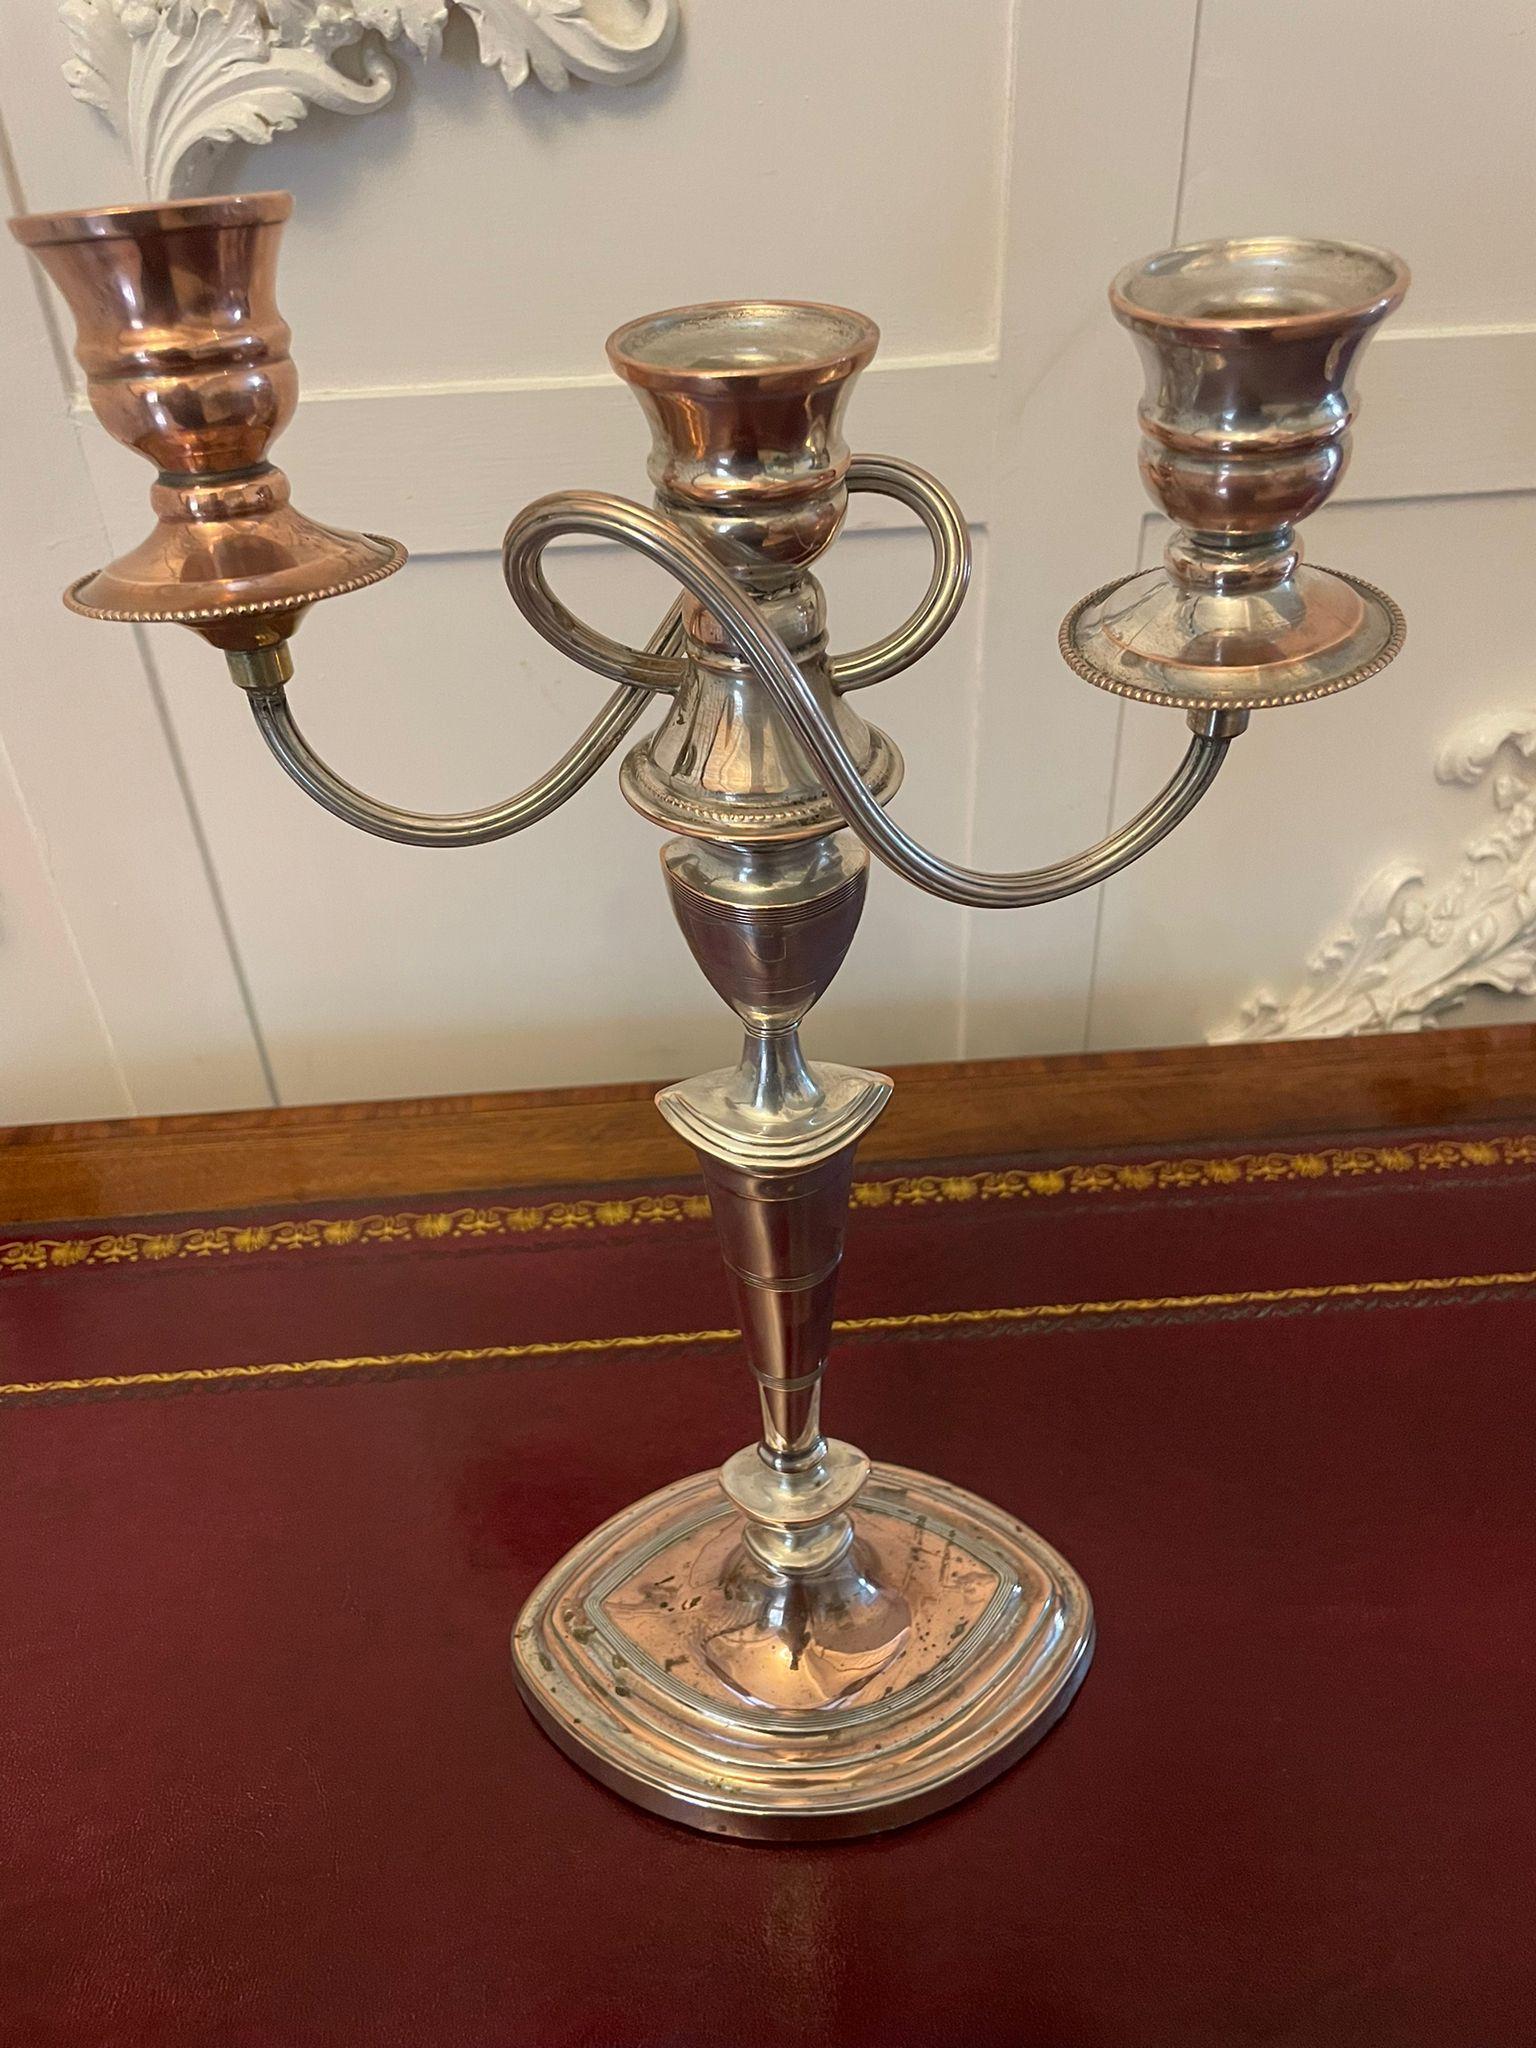 Pair of antique Victorian quality Sheffield plated candelabras having a three branch removable shaped top above an elegant tapering column on a stepped oval base


A wonderful pair of exceptional design and boasting a lovely aged related